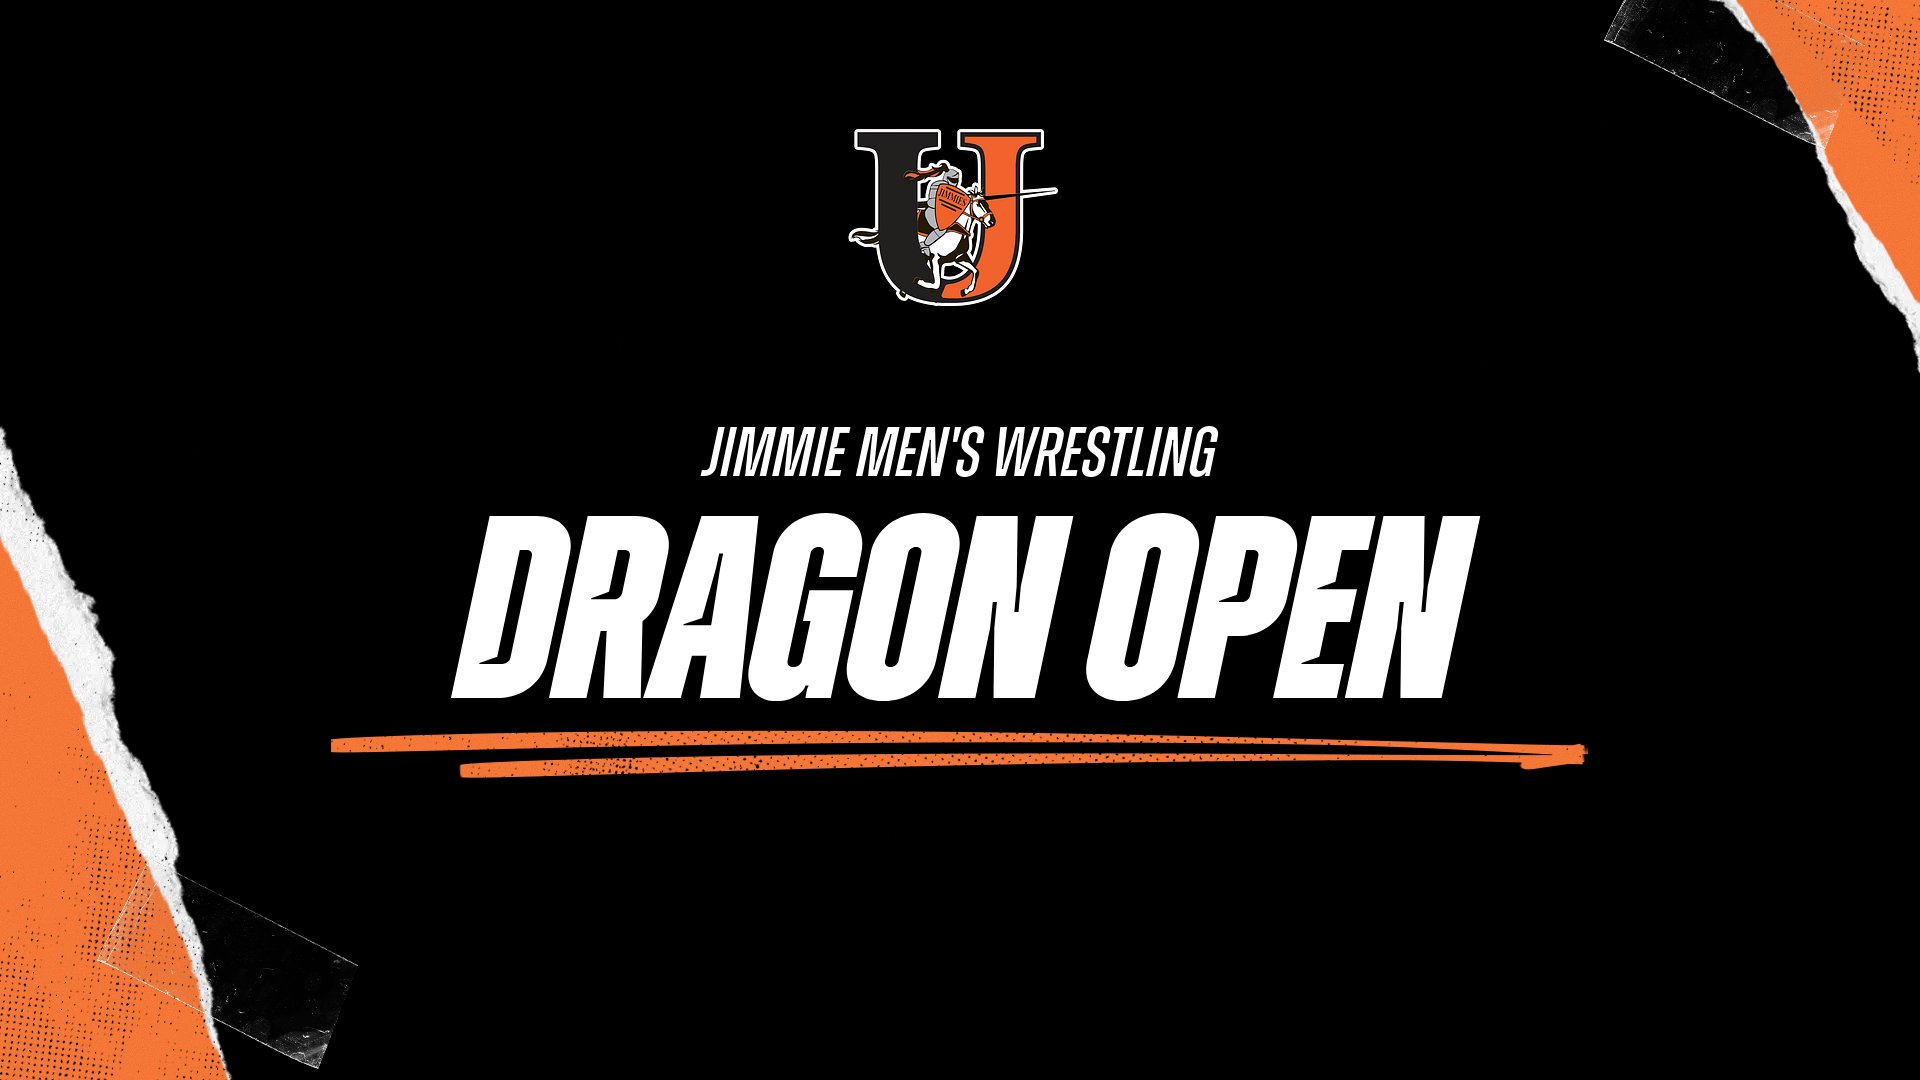 Robinson 2nd for Jimmie men at Dragon Open